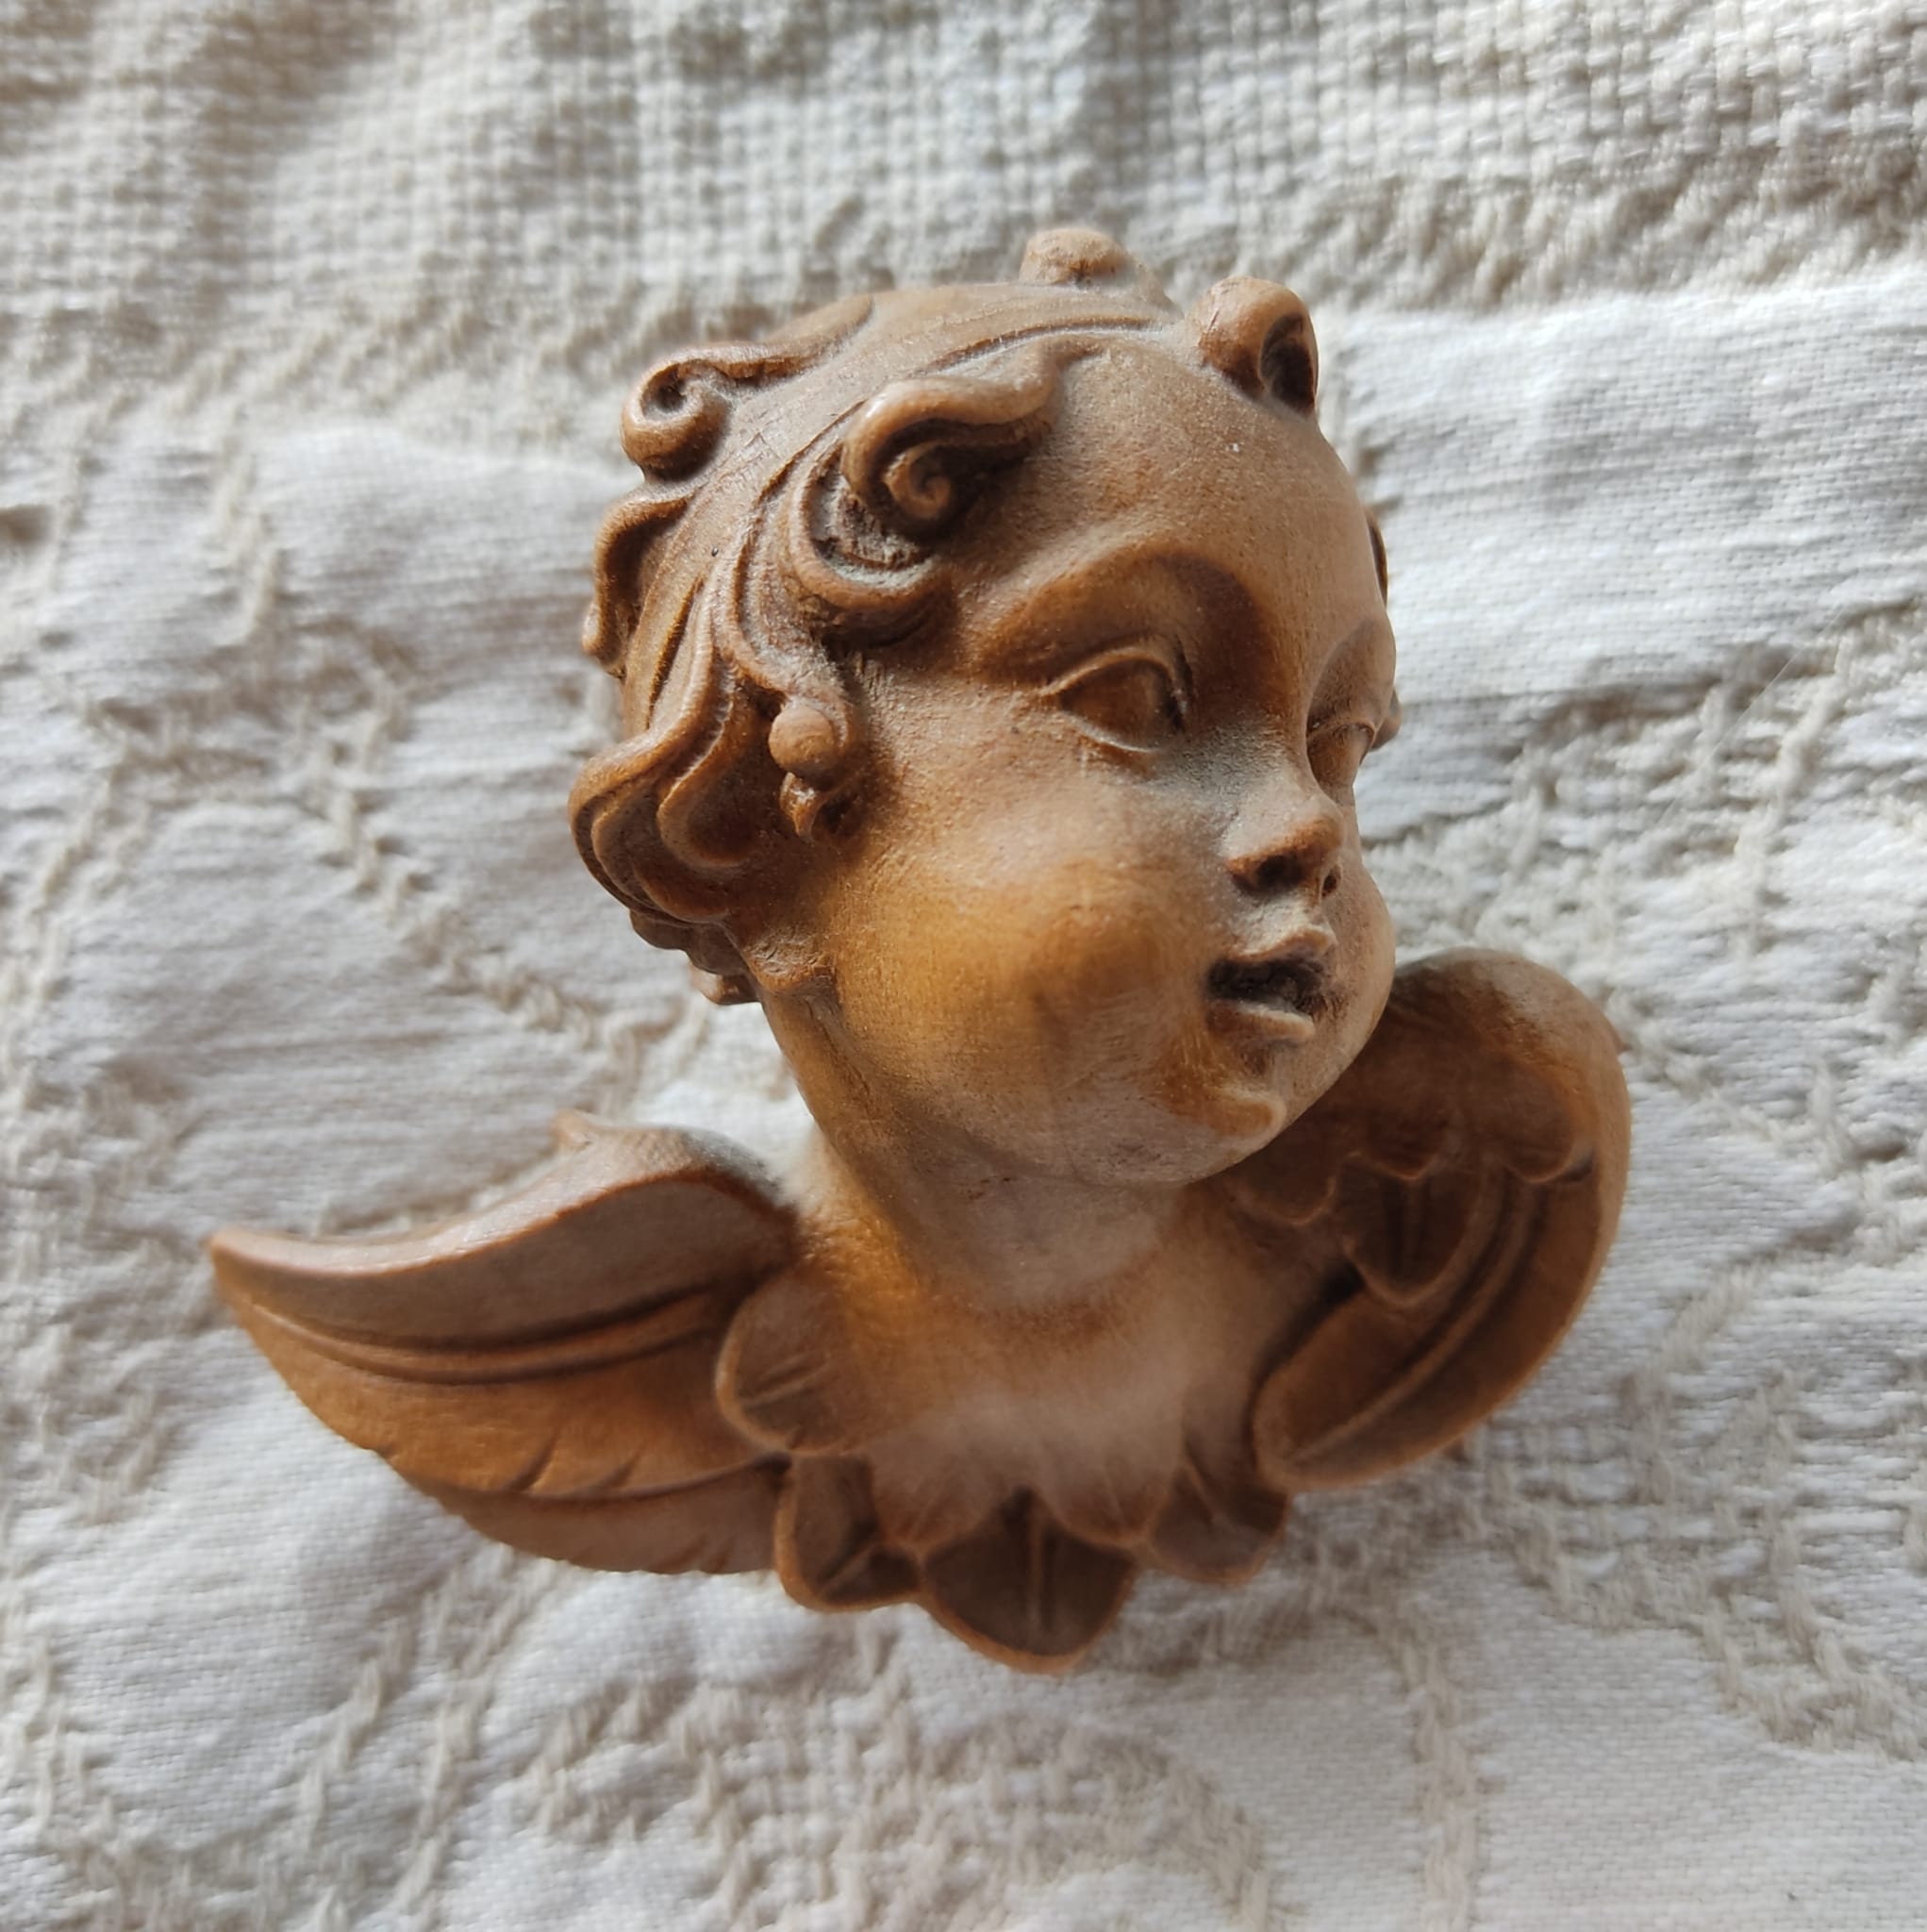 Putto Carved Heads ANTIQUE Angel Wood Handcrafted Alpine Angel Face Lime Lovely 2 Old Folk Etsy Wood Kong Carving Art - Putti Hong